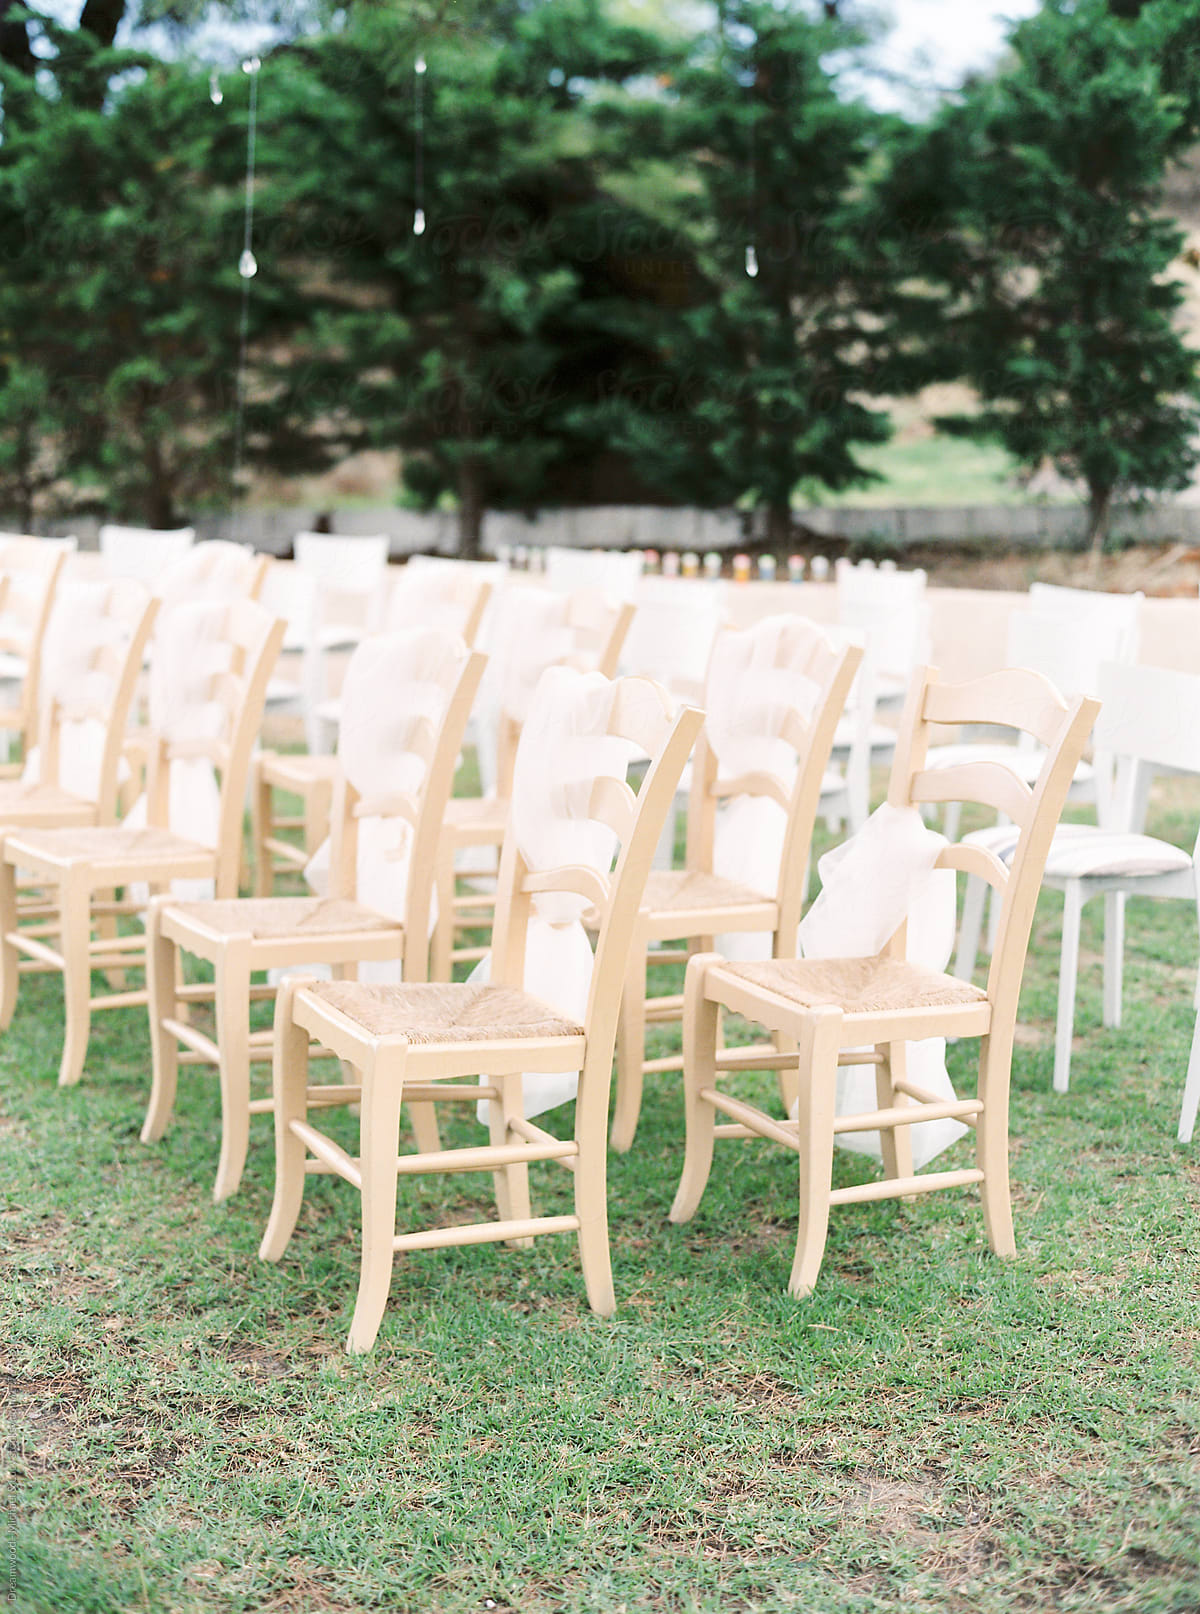 Rows of chairs for wedding in garden